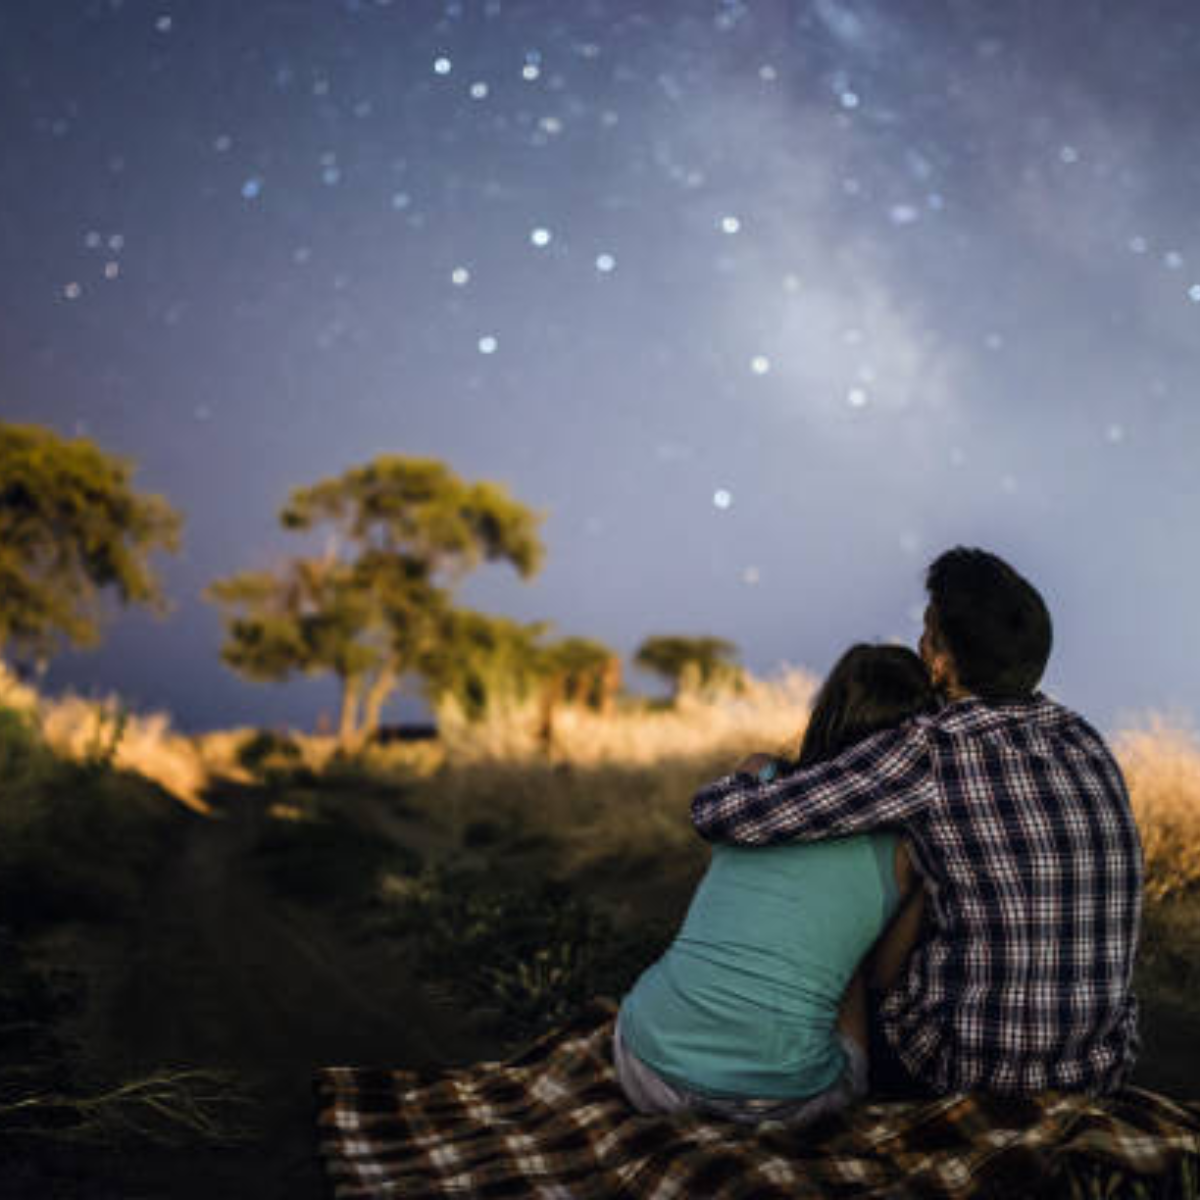 13. Embark on a Stargazing Adventure: A Unique and Thoughtful 13th Anniversary Gift for Him